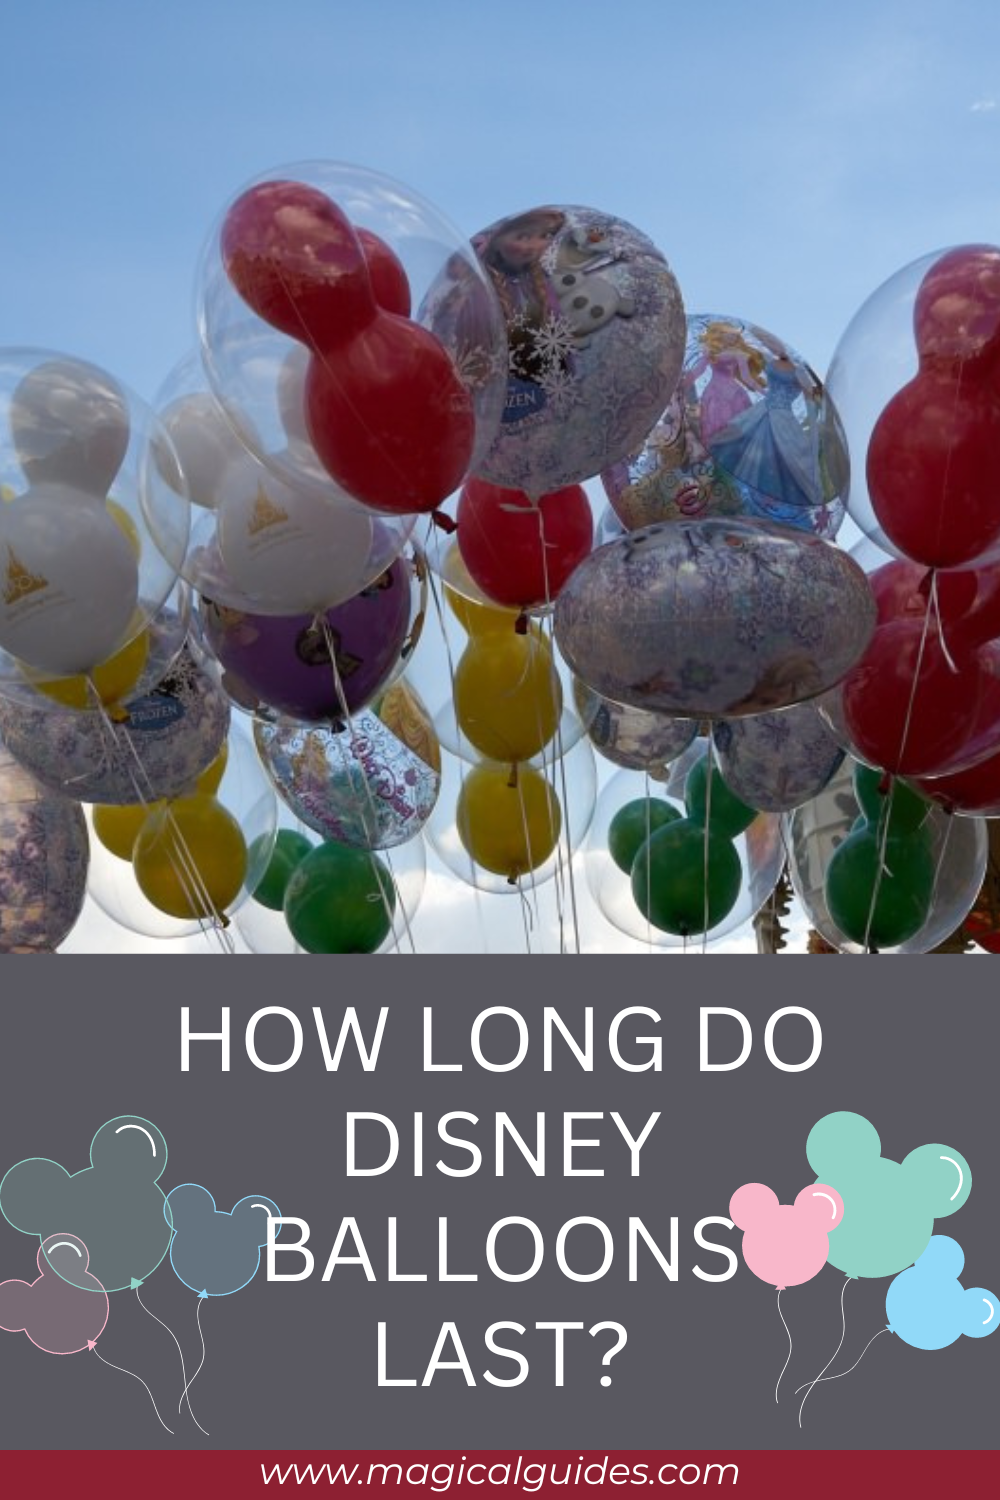 Everything you need to know about buying a Disney World Balloon and how to deflate them and bring them home as a souvenir.